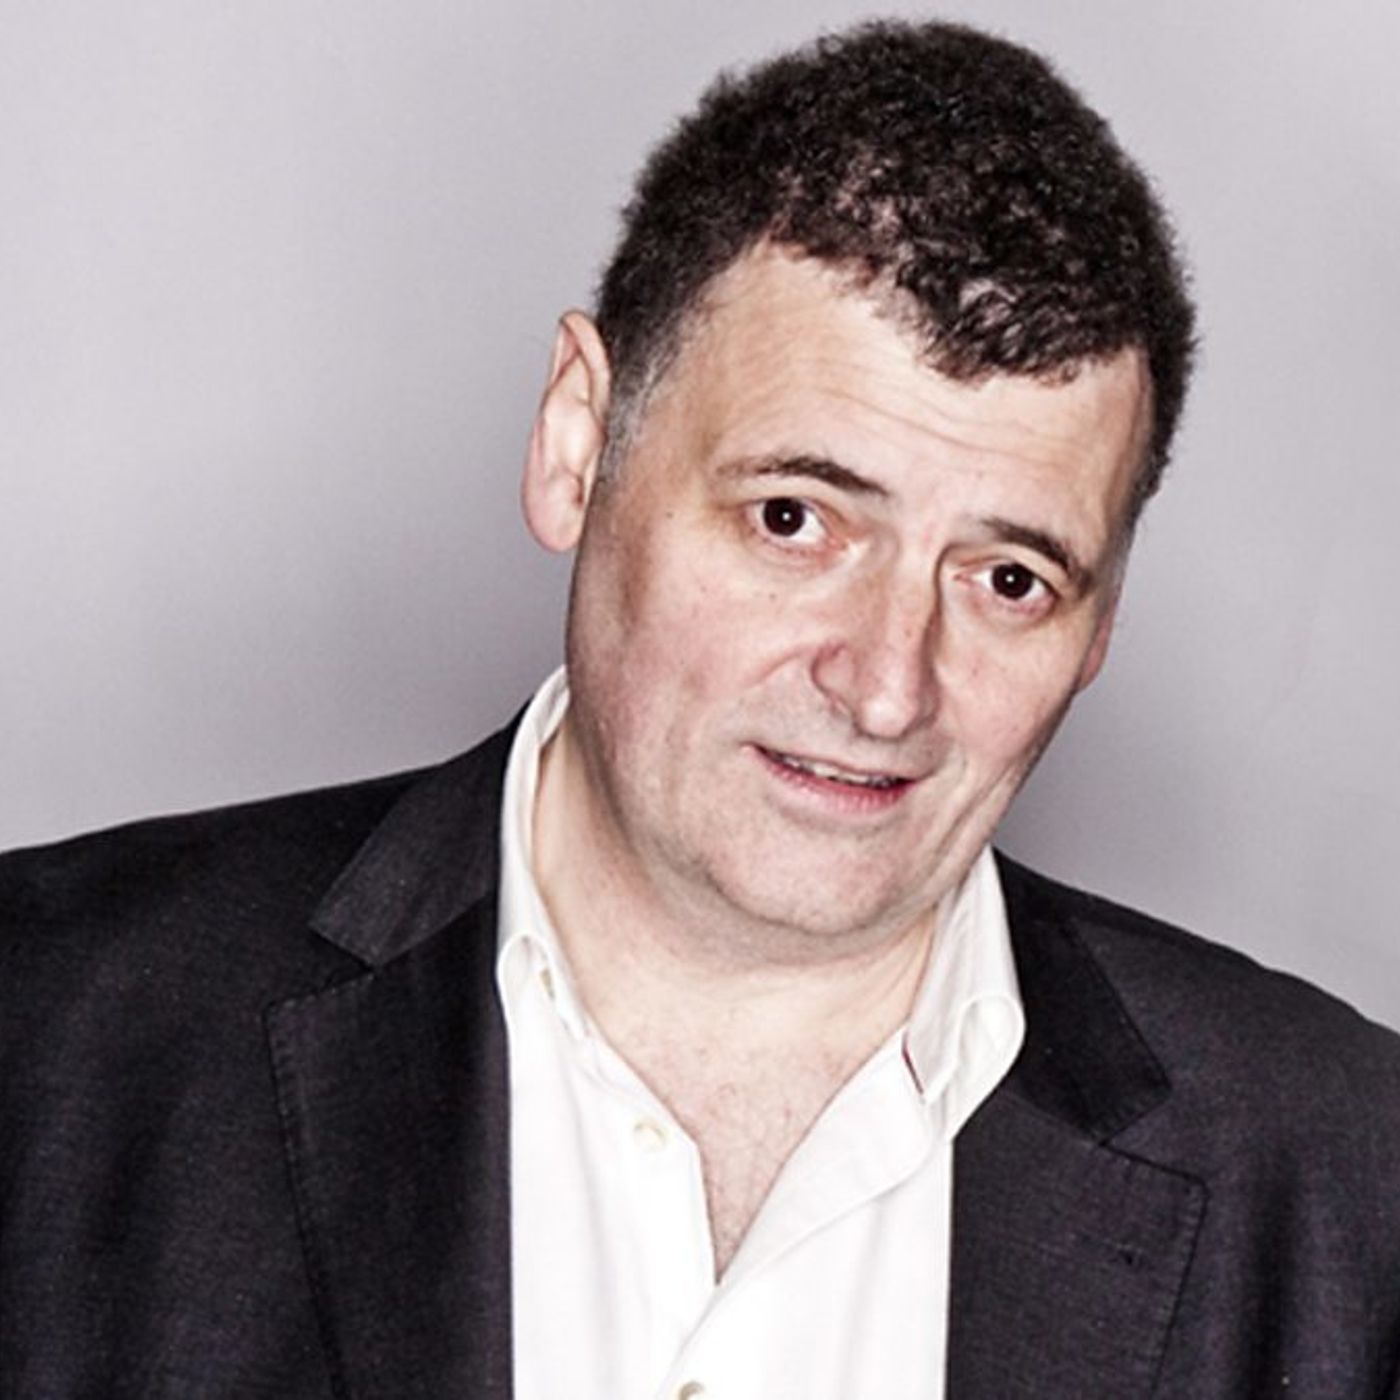 S3 Ep9: (From 2013) The End of an Era? How Moffat's Doing So Far